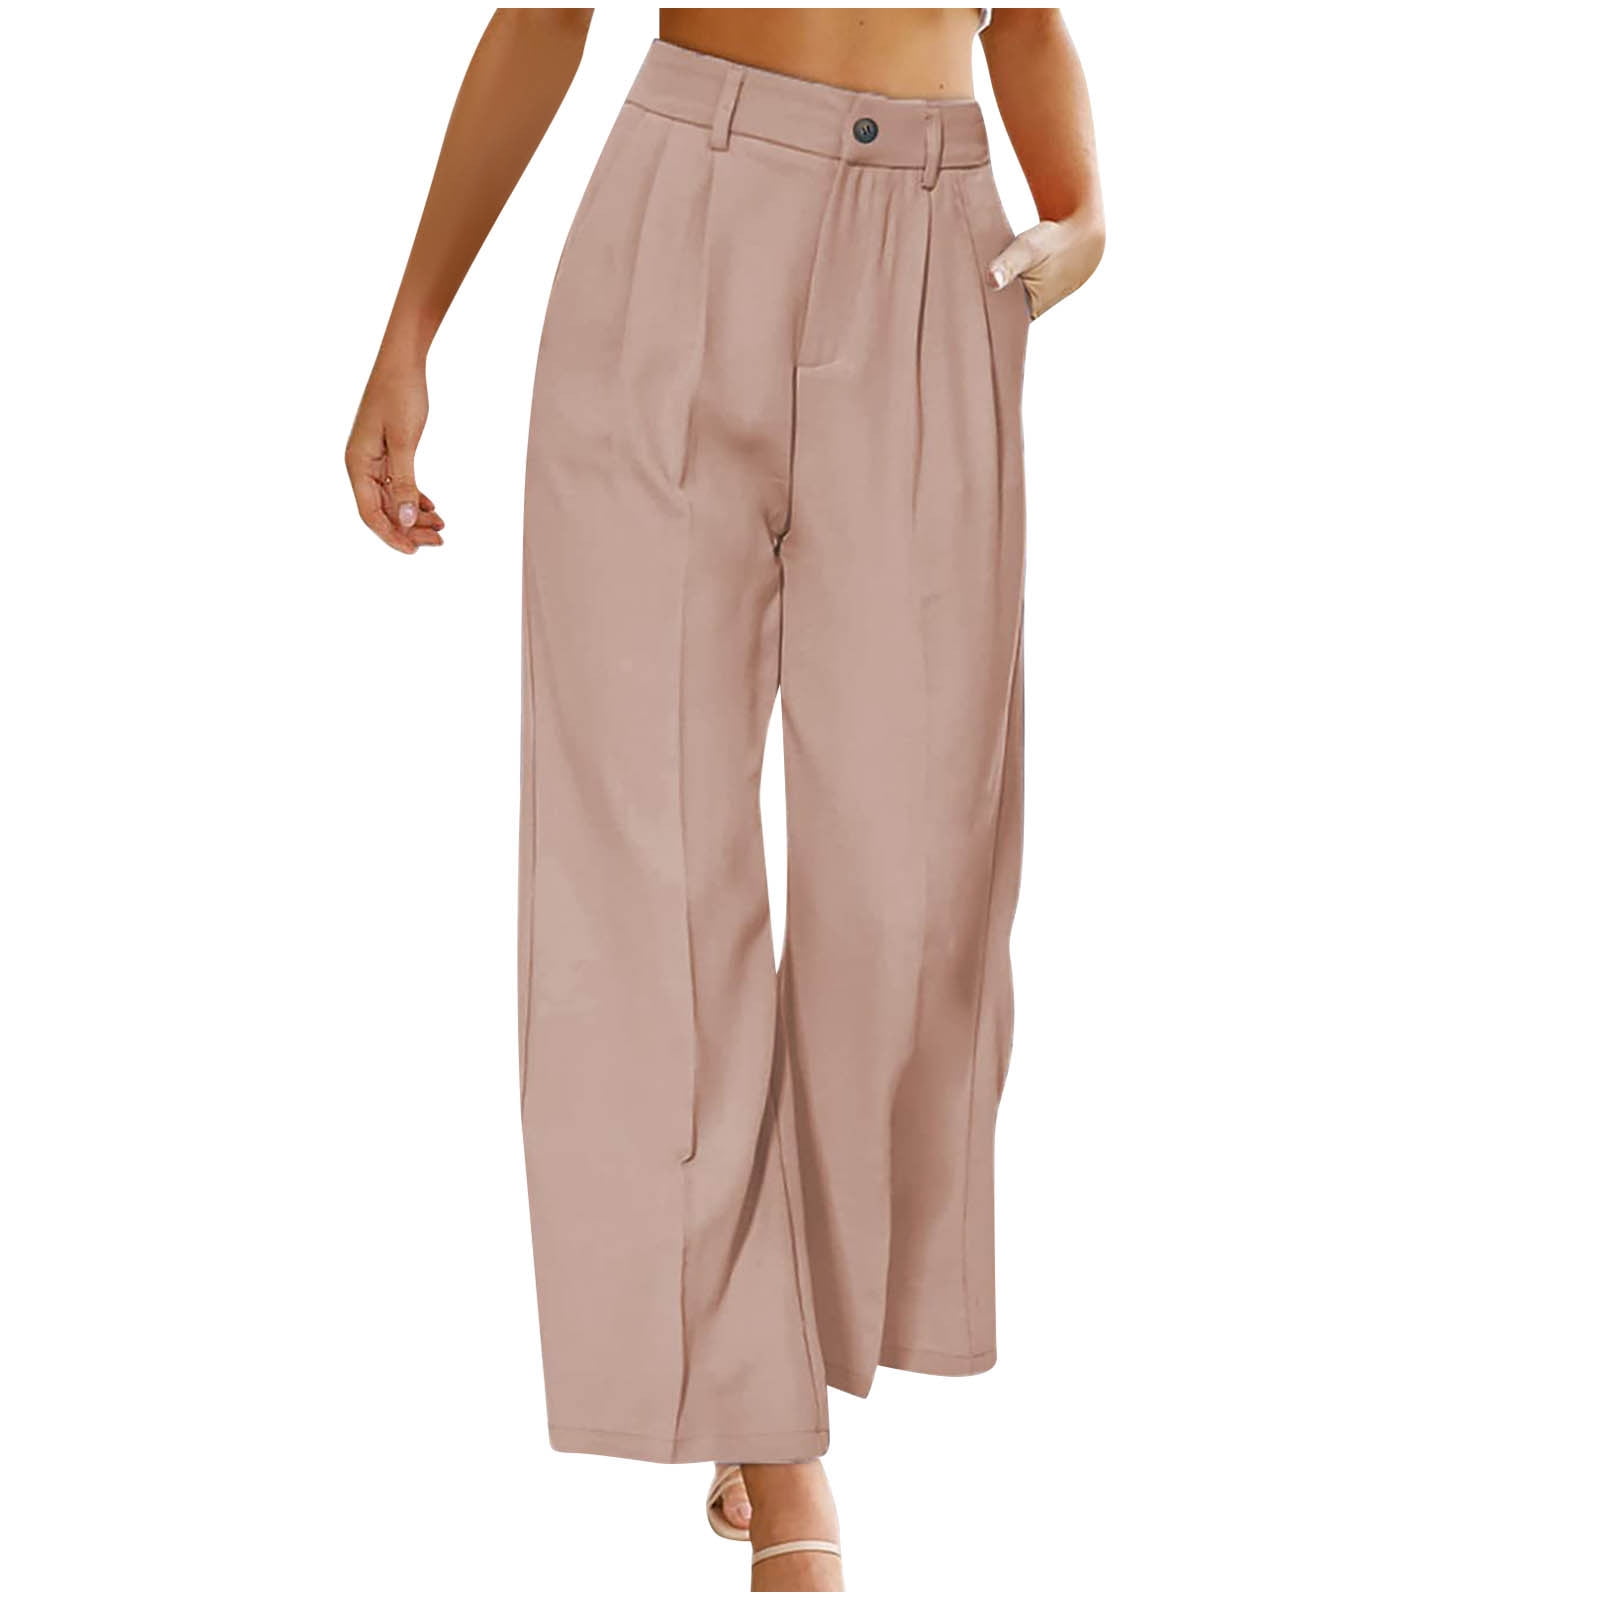 Dress Pants for Women High Waisted Zipper Wide Leg Pants Casual Baggy Comfy  Work Office Lounge Trousers with Pockets Ladies Clothes